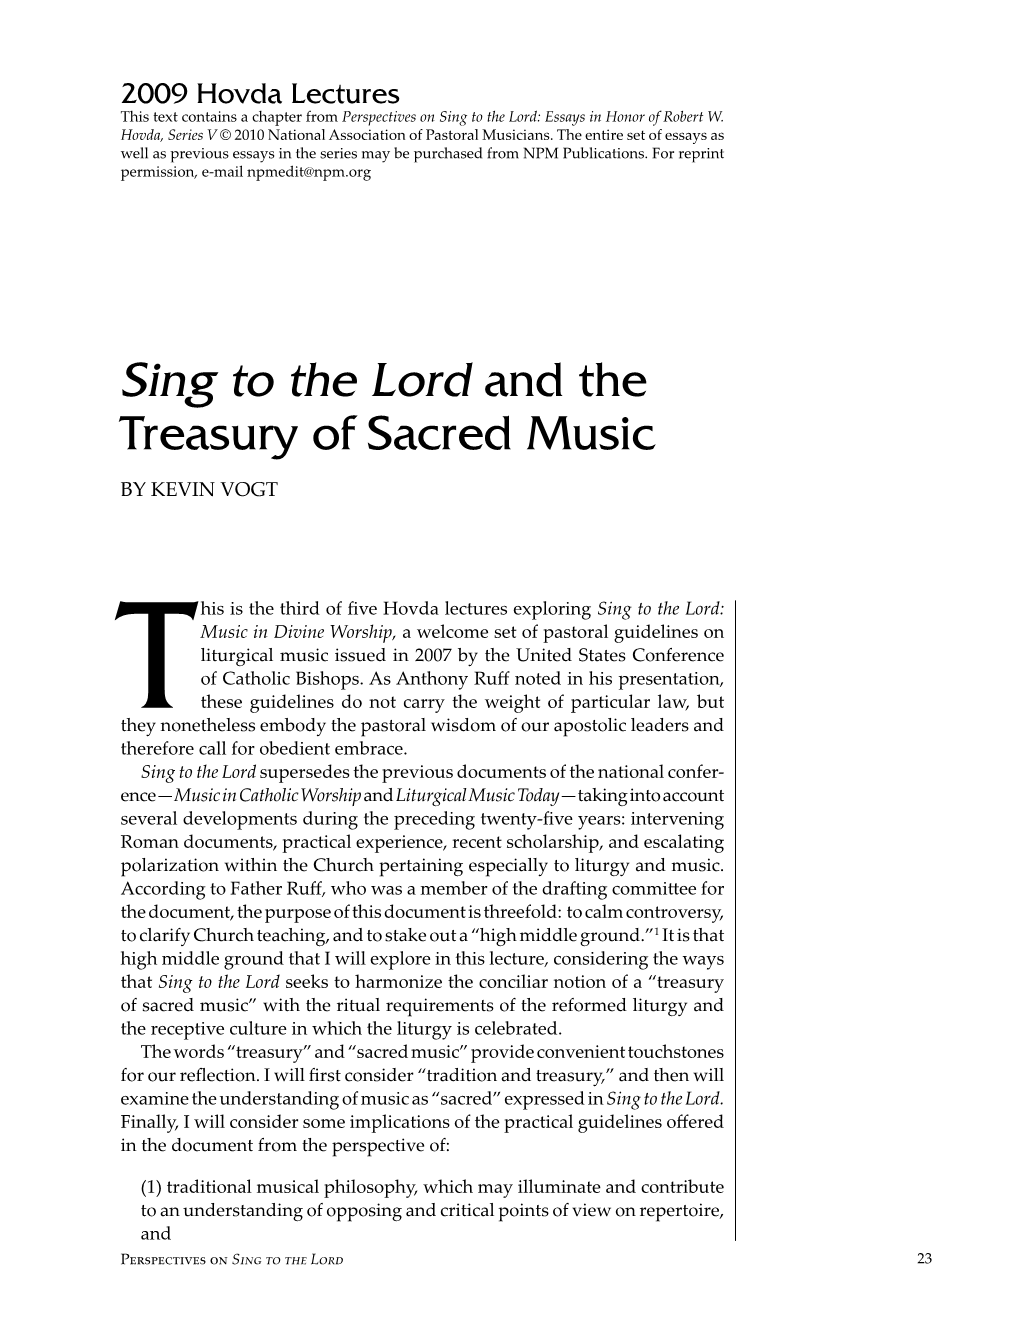 Sing to the Lord and the Treasury of Sacred Music